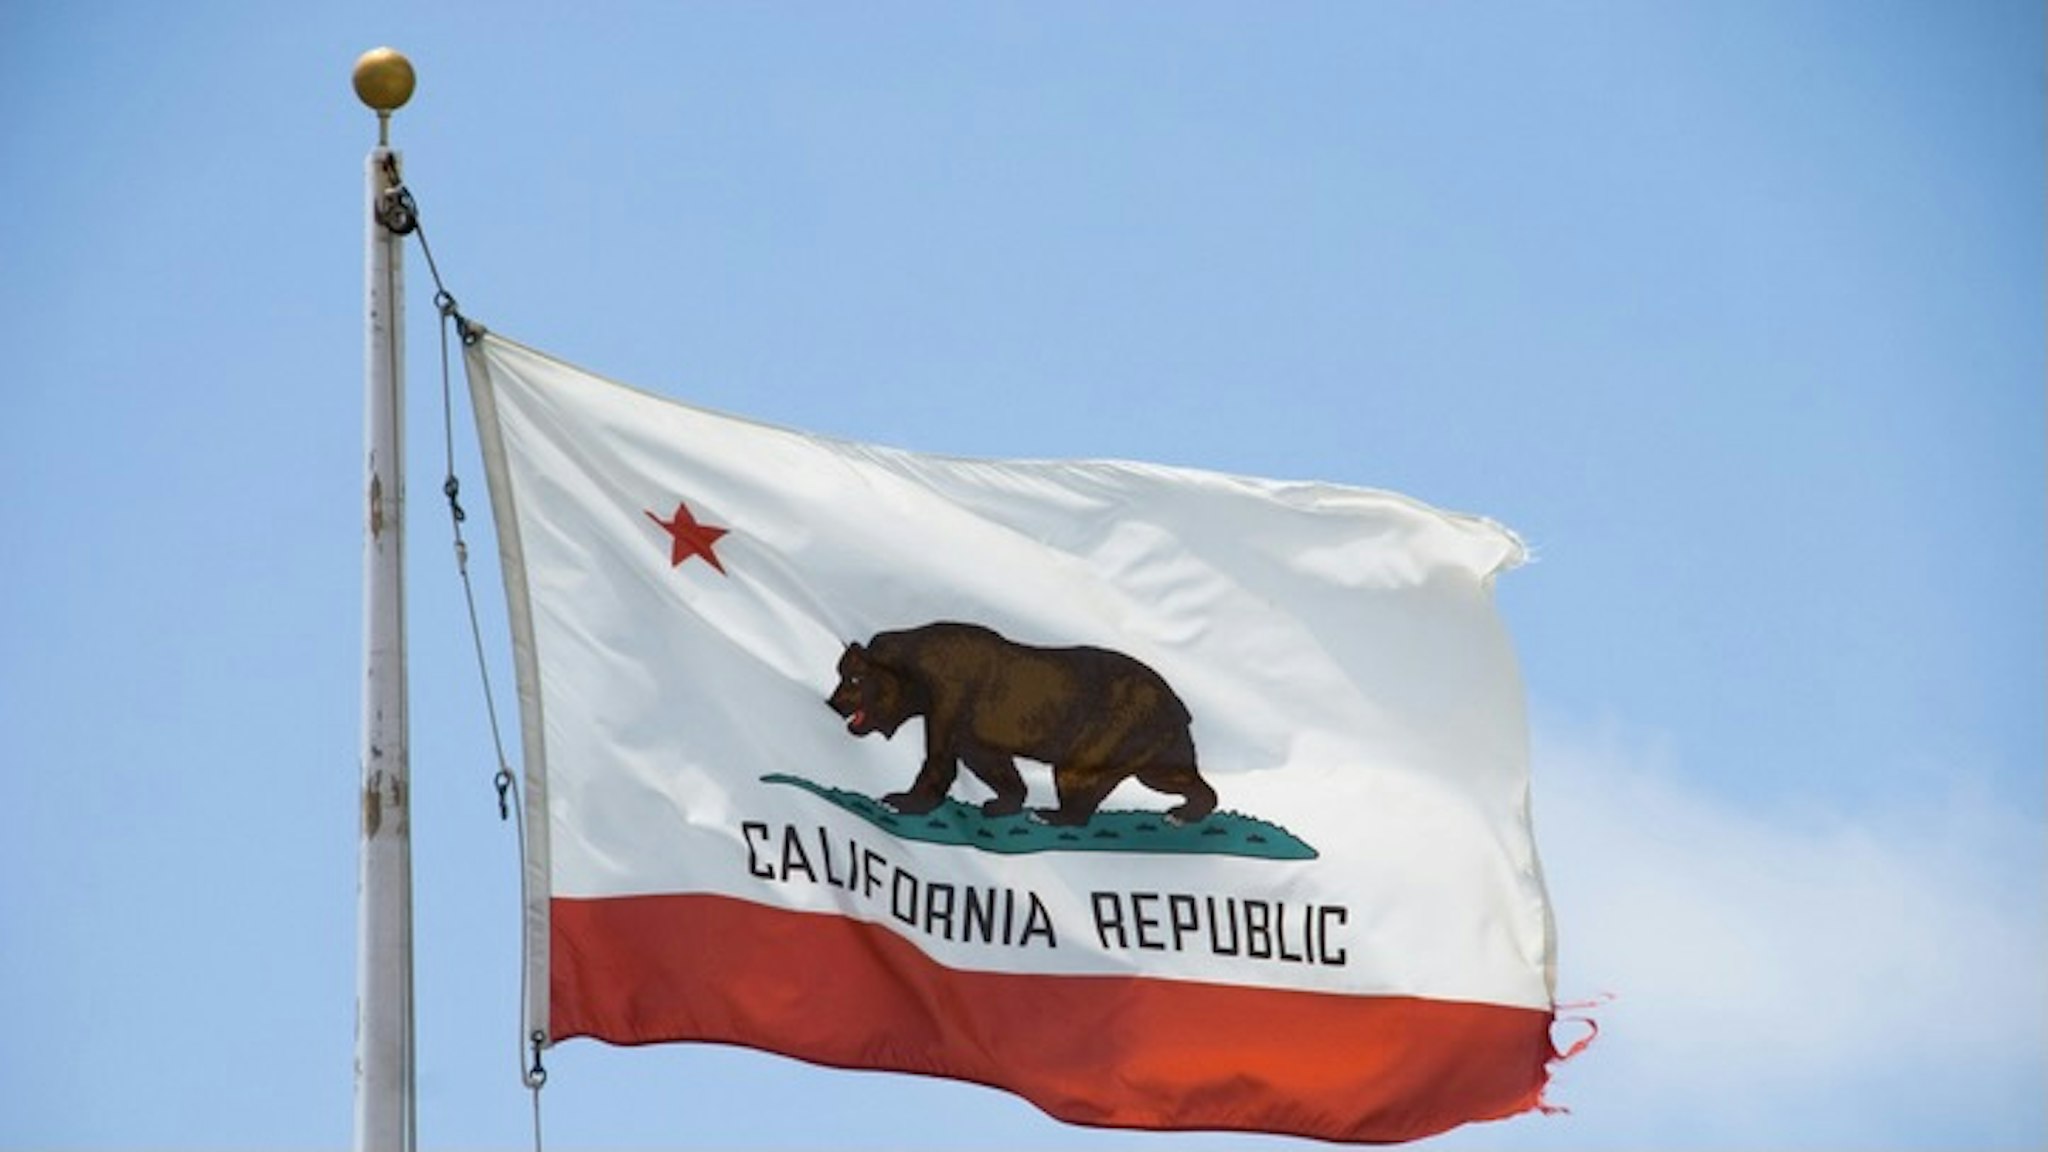 Low Angle View Of California Flag Against Clear Sky - stock photo Alex Reitter / EyeEm via Getty Images